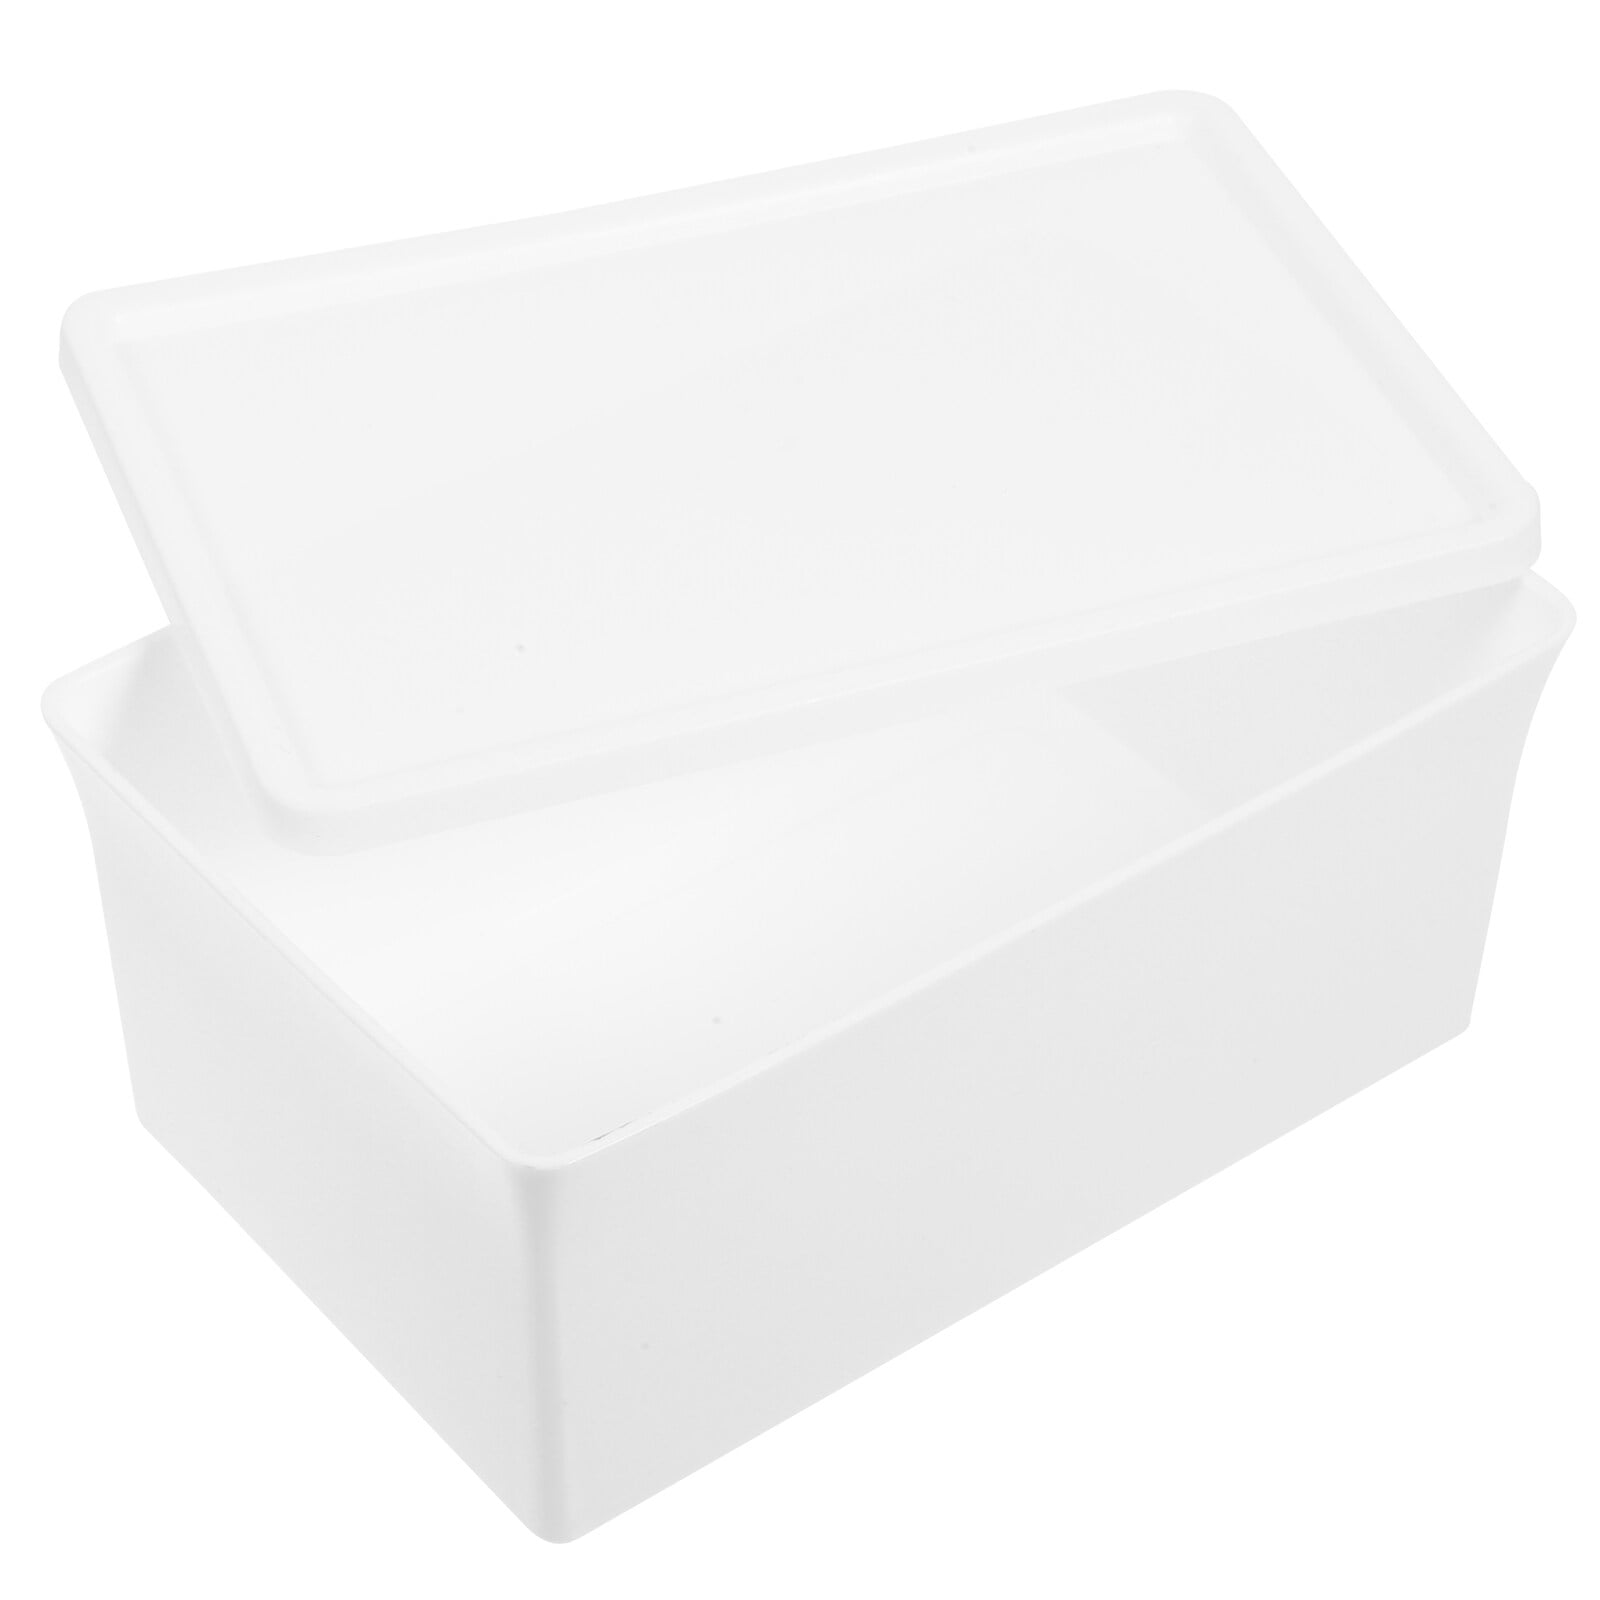 Magnetic Sheets Plastic Folder Bags Storage Box Containers - Temu